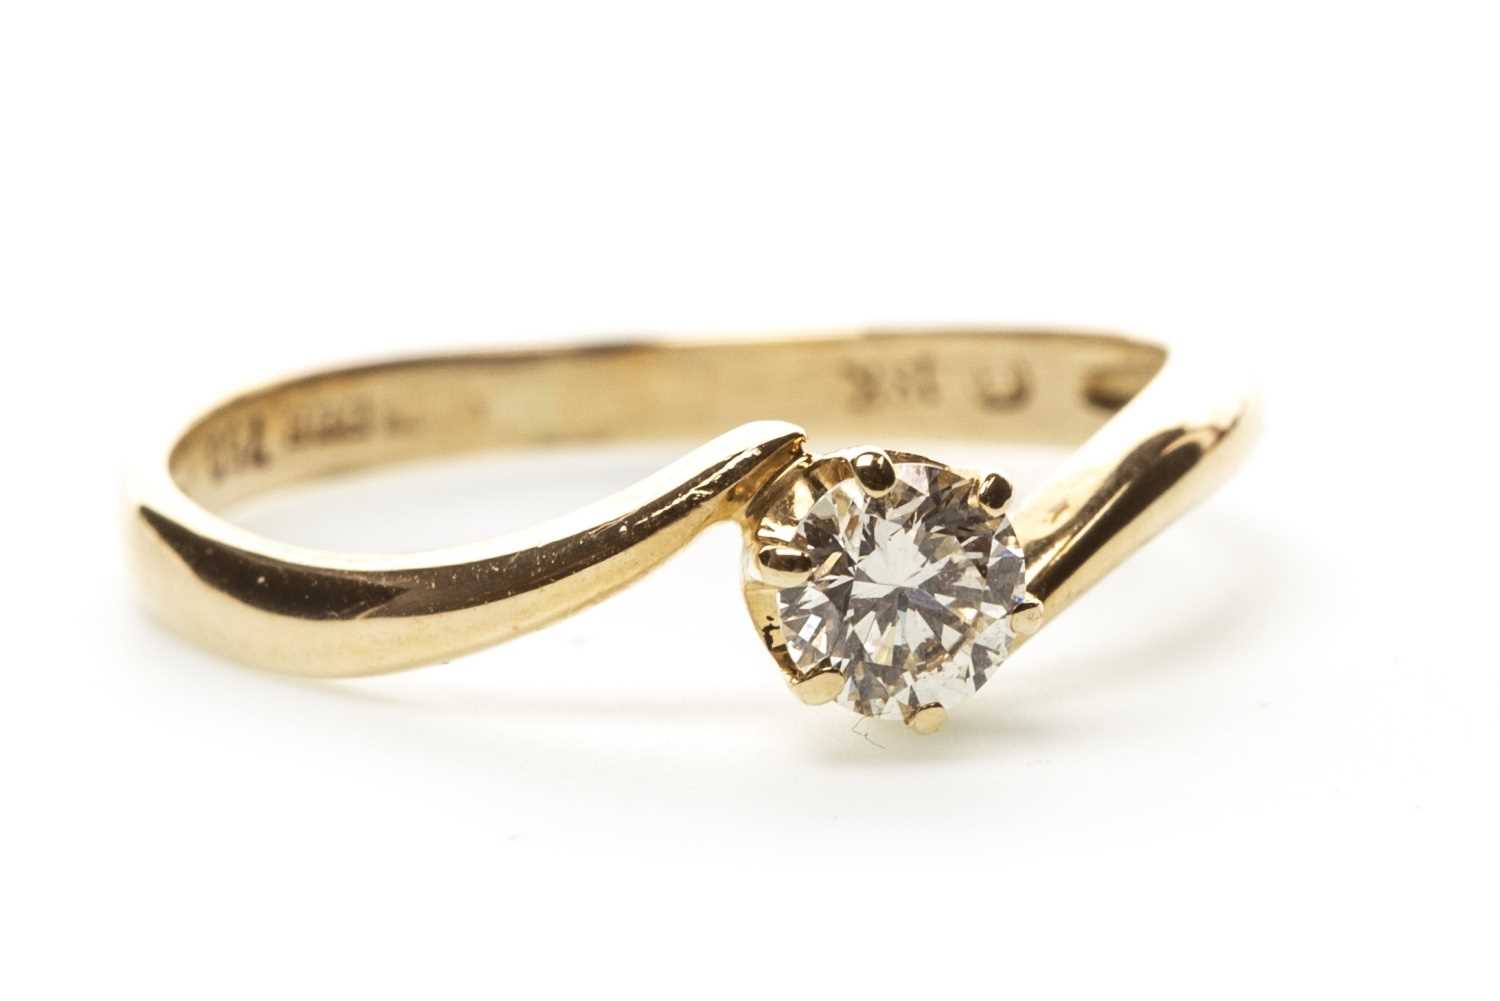 Lot 55 - A DIAMOND SOLITAIRE RING